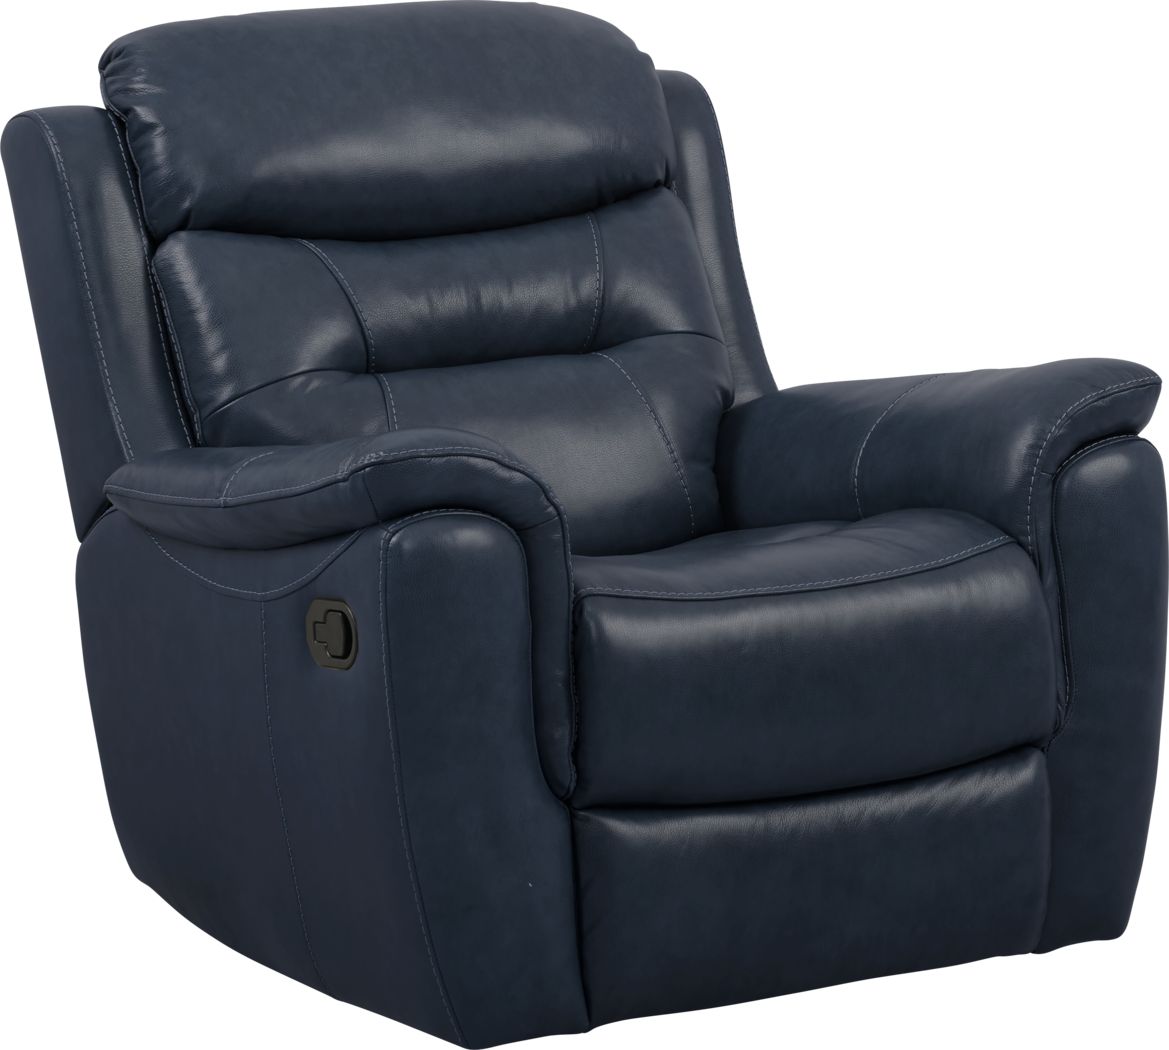 Sabella Navy Leather Glider Recliner 15600213 Image Item?cache Id=5ca50fed8a7f4d7c160020099f3c58d6